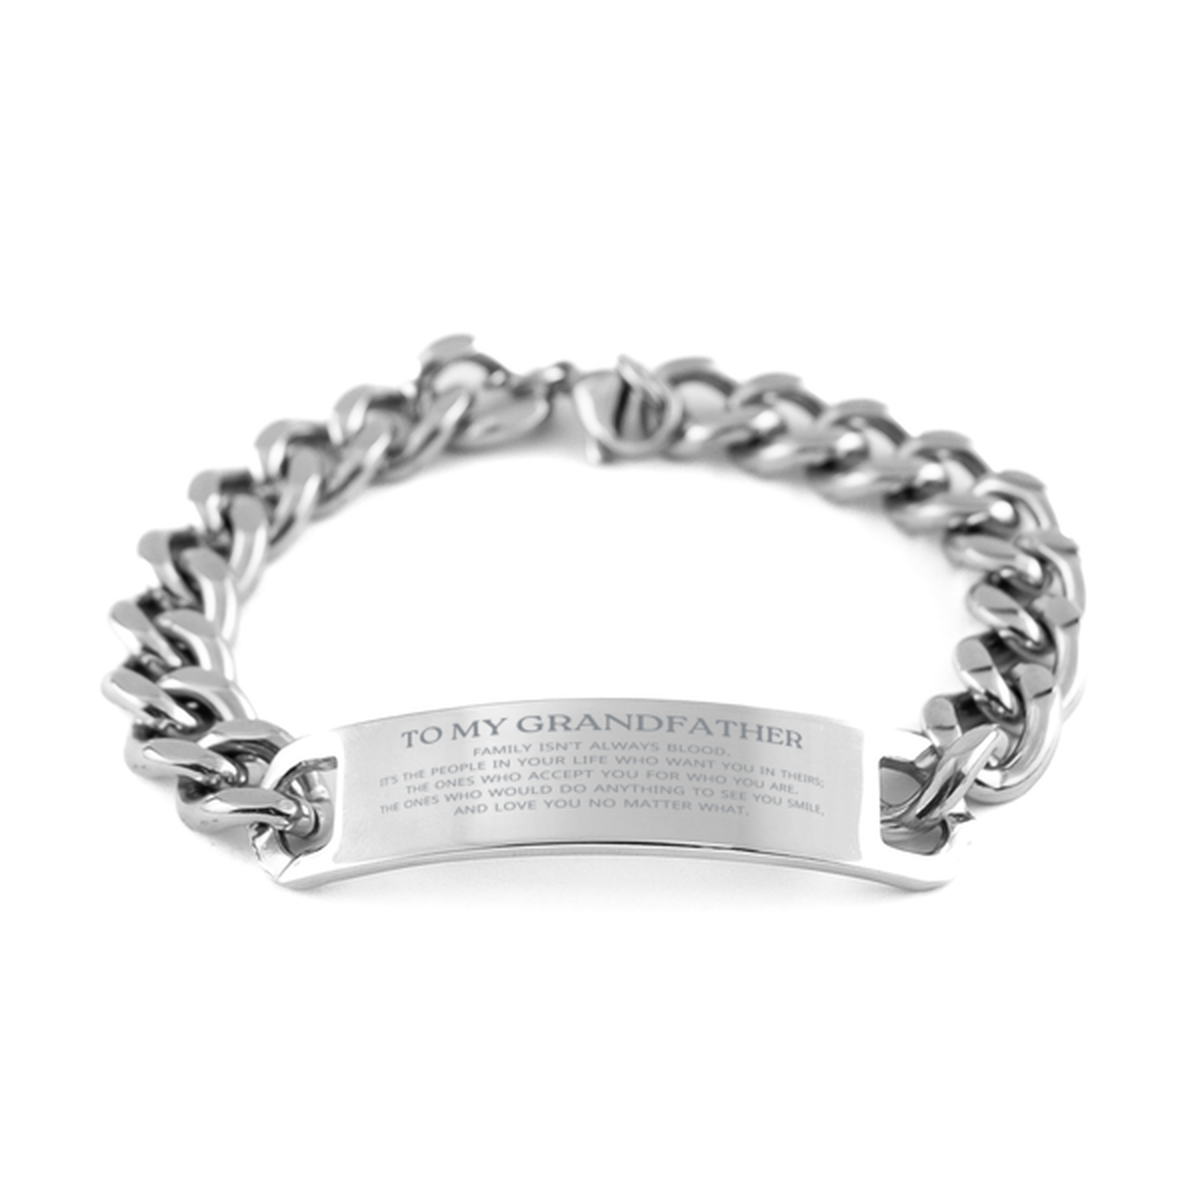 To My Grandfather Gifts, Family isn't always blood, Grandfather Cuban Chain Stainless Steel Bracelet, Birthday Christmas Unique Present For Grandfather